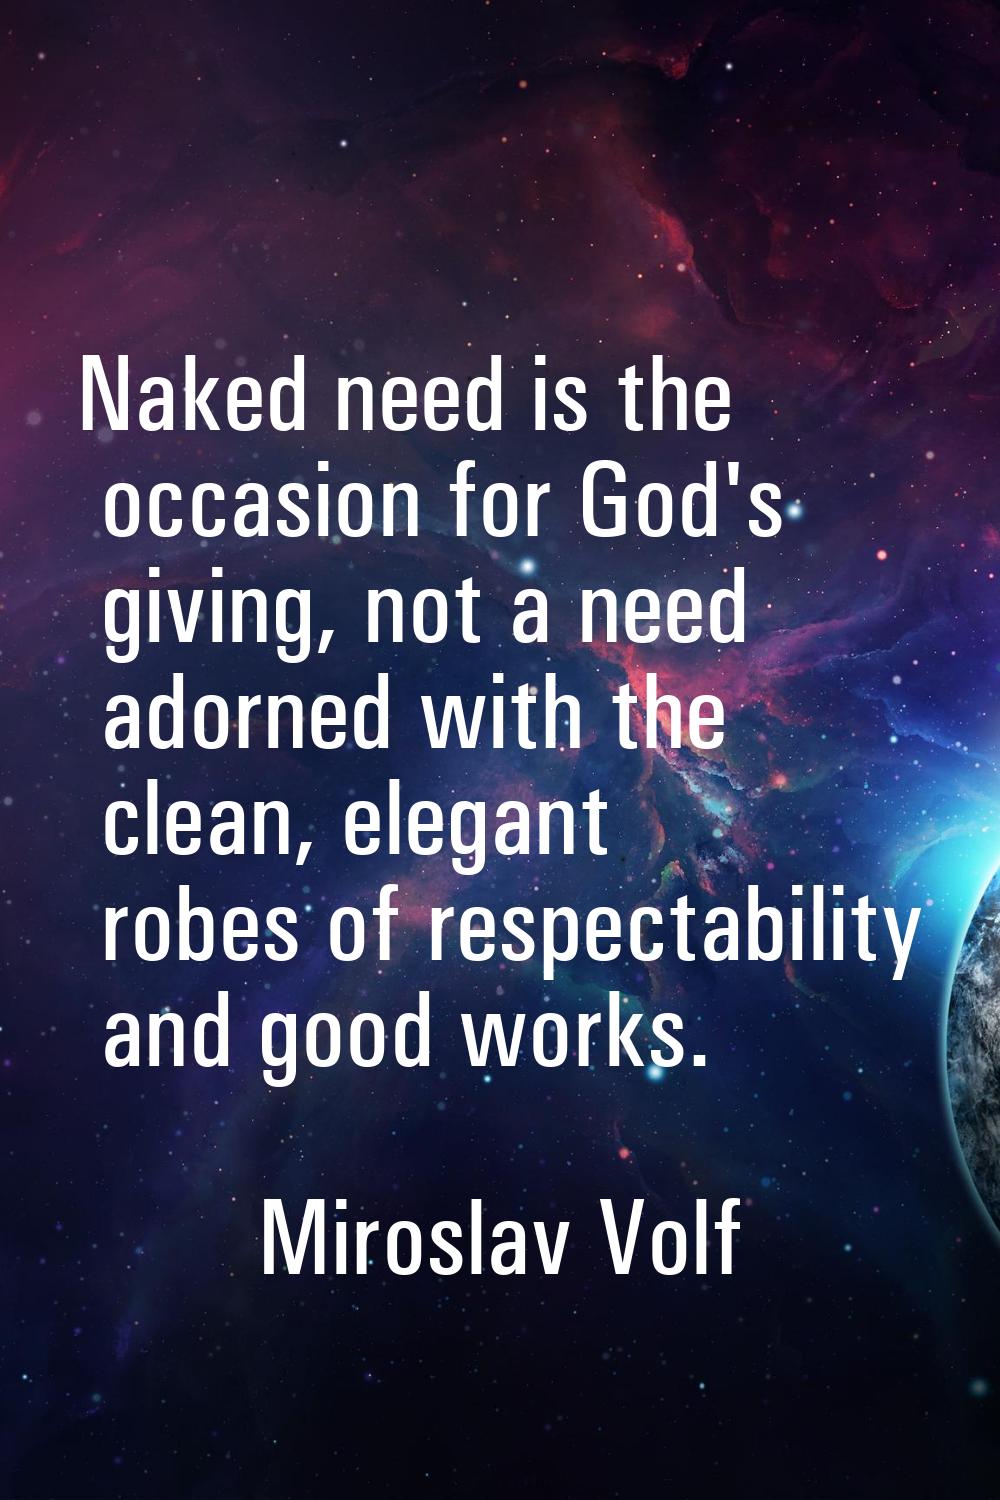 Naked need is the occasion for God's giving, not a need adorned with the clean, elegant robes of re